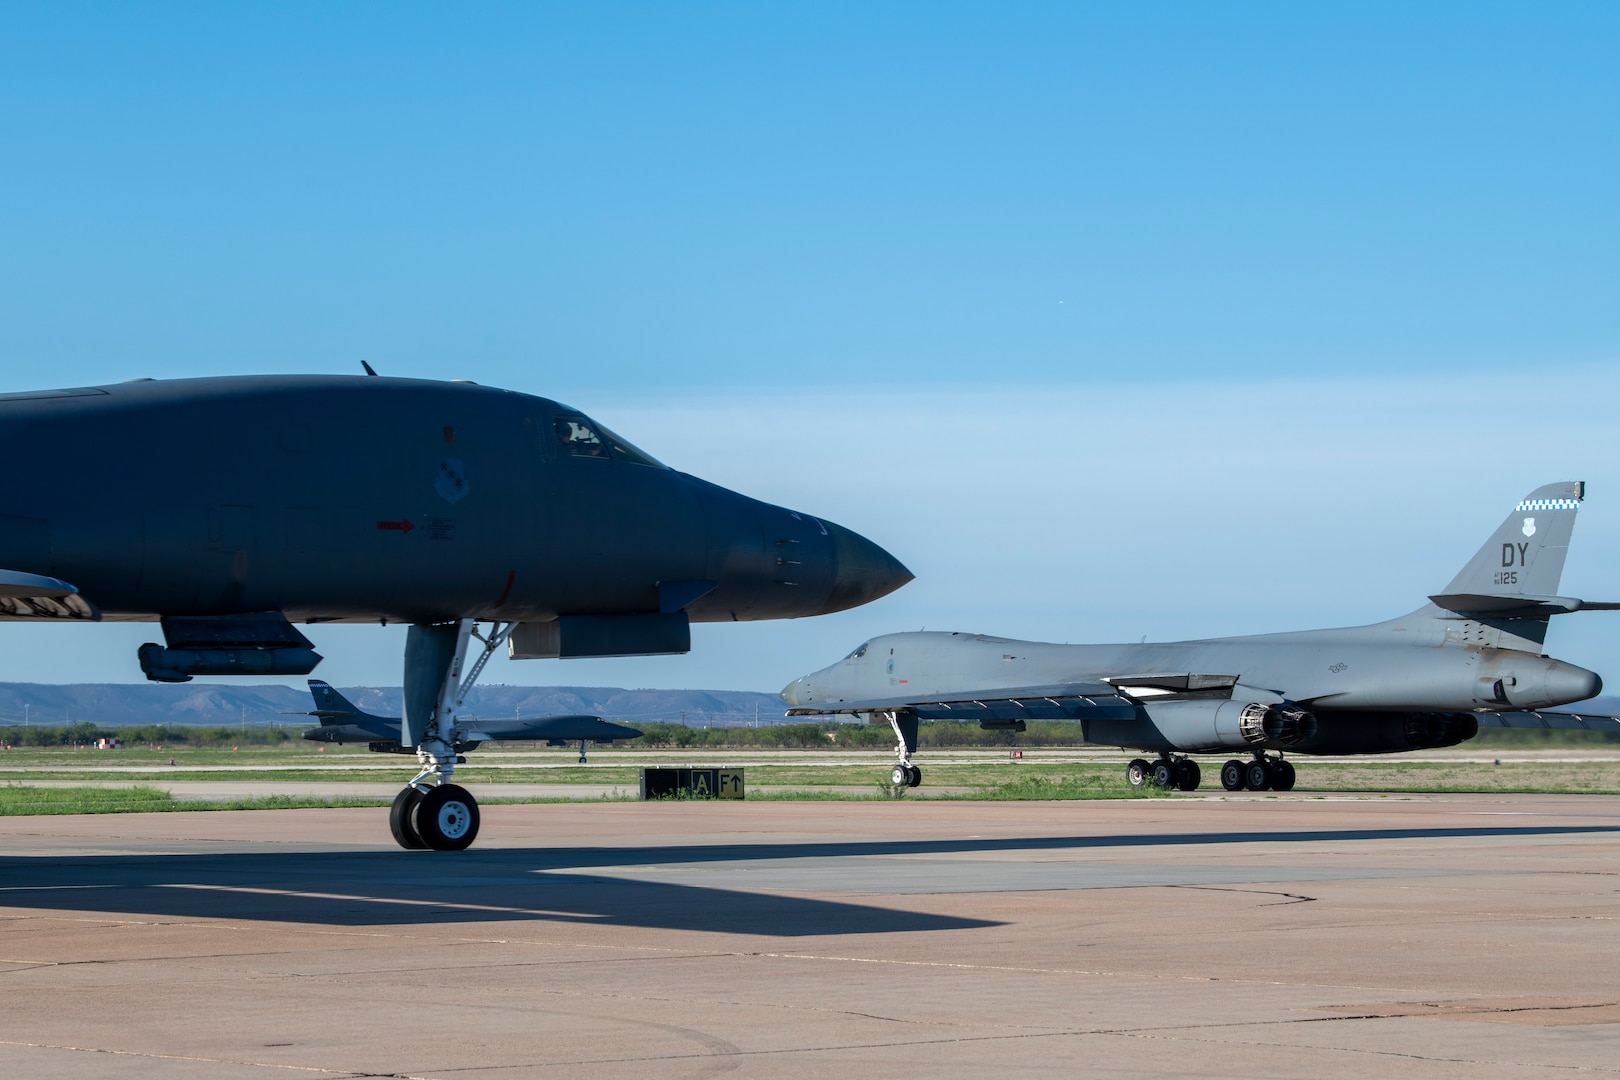 Three B-1B Lancers prepare to takeoff at Dyess Air Force Base, Texas Sept. 7th, 2022. The U.S. Strategic Command routinely conducts Bomber Task Force operations across the globe with and in support of the Geographic Combatant Commands. (U.S. Air Force photo by Senior Airman Mercedes Porter)